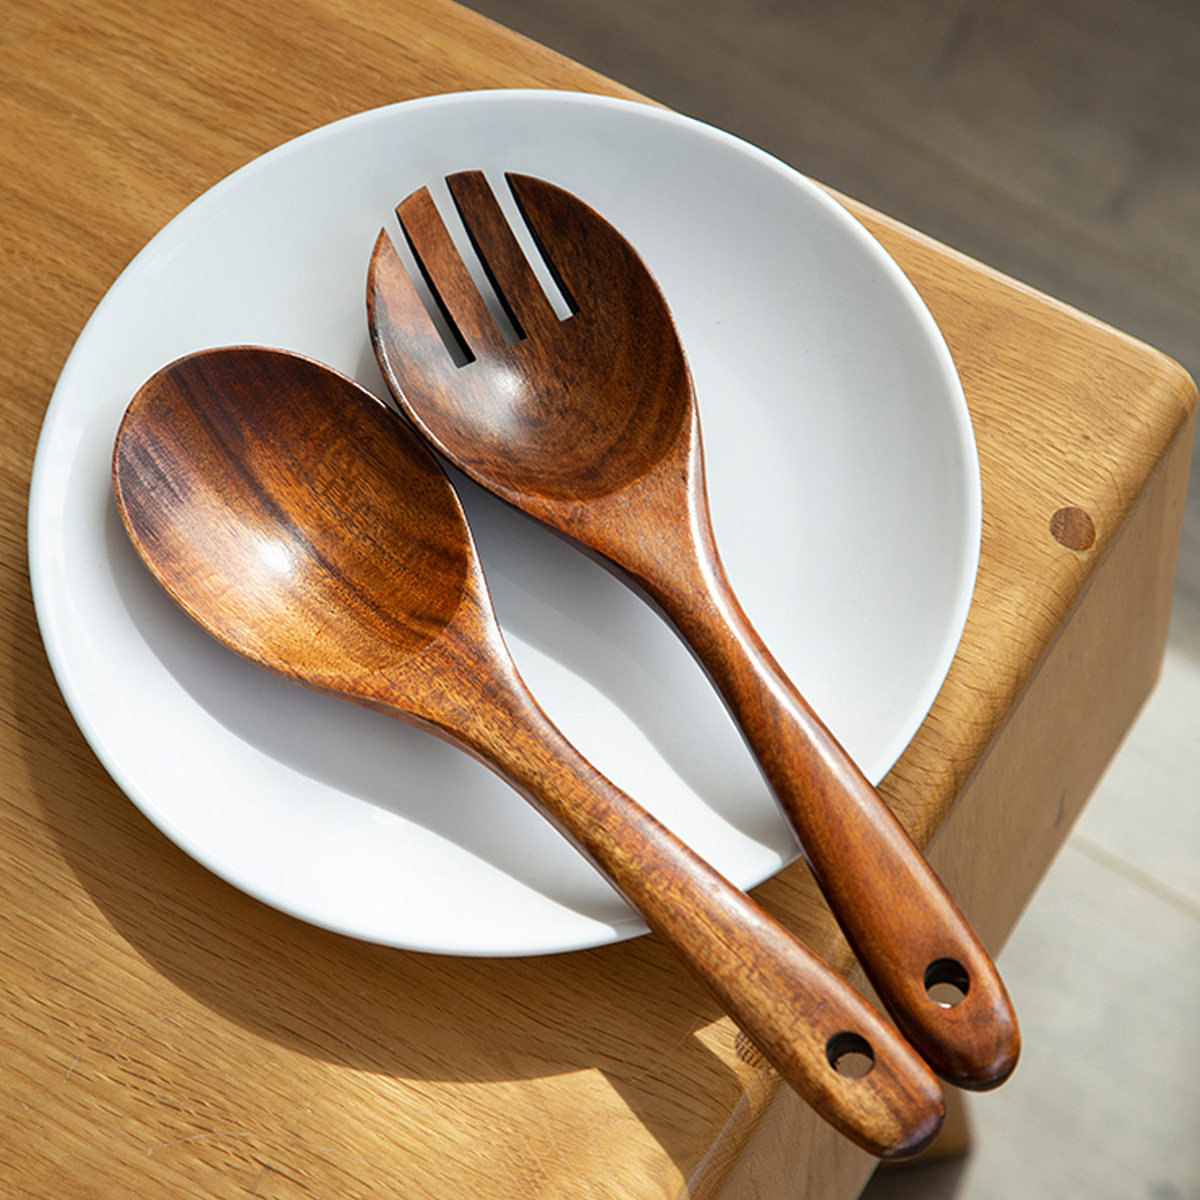 Wooden Salad Bowl- 9.4 Inch Wood Salad Wooden Bowl With Spoon, Can Be Used  For Fruit, Salad